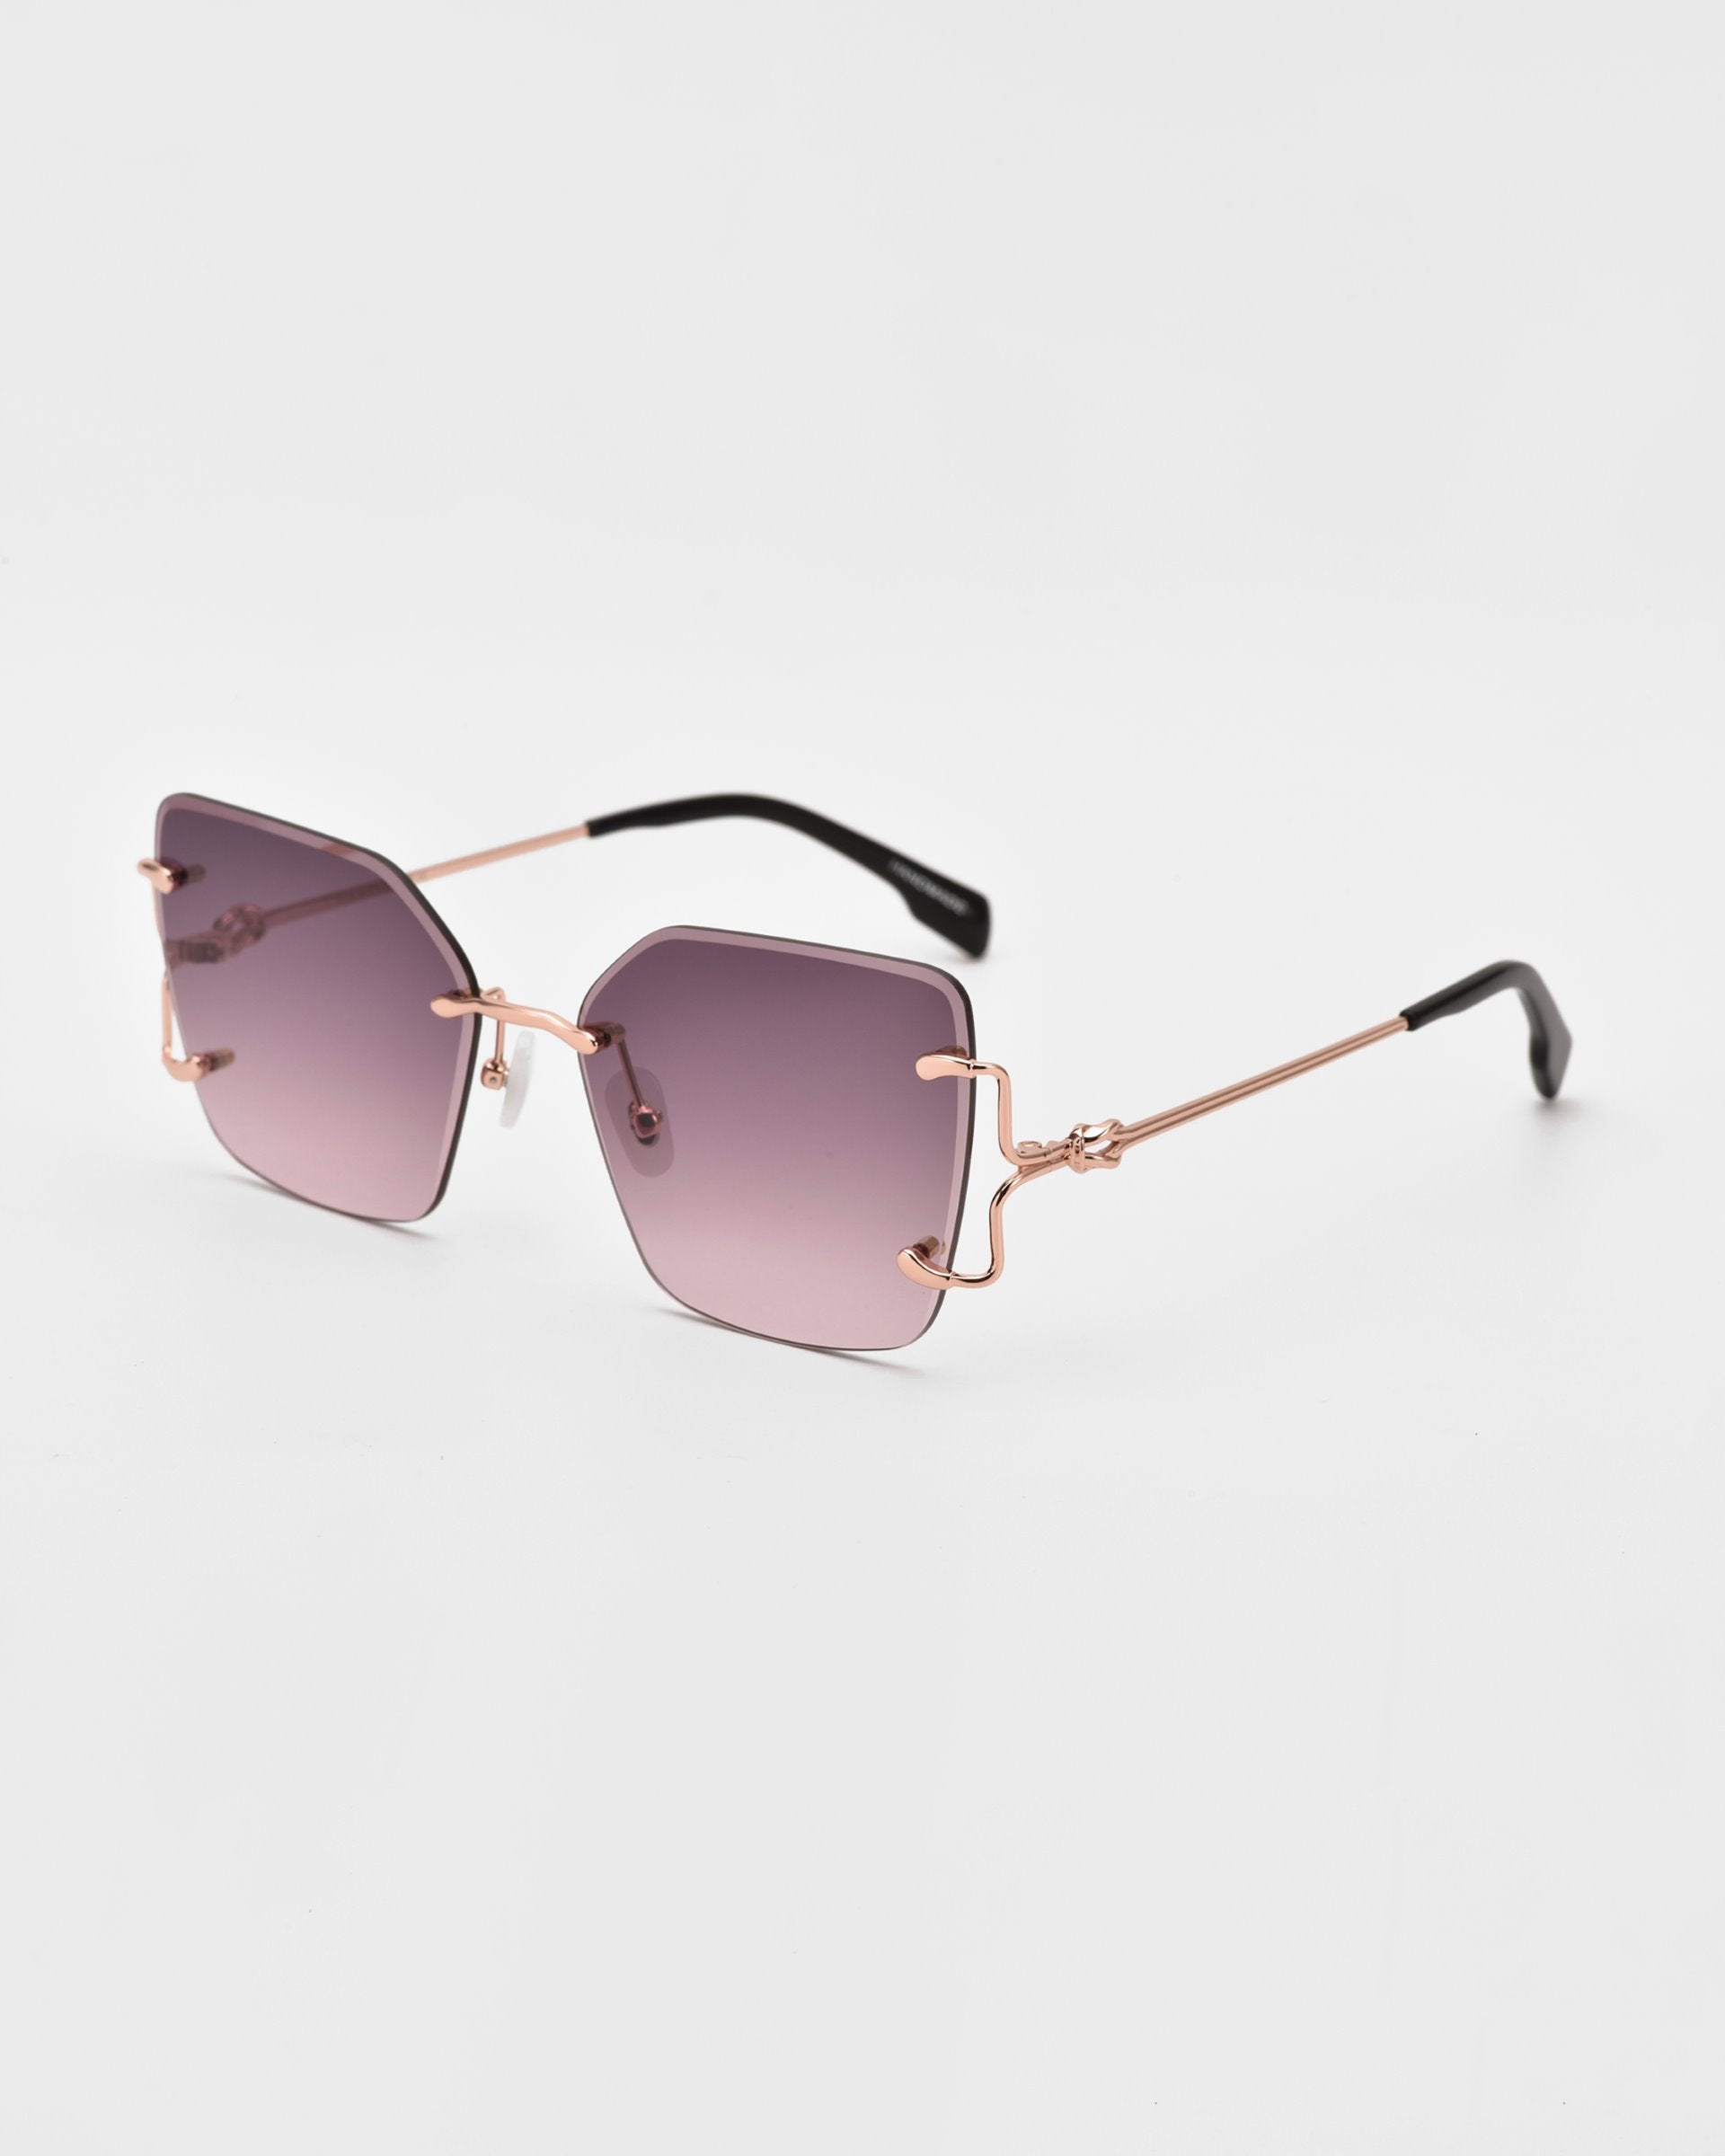 A pair of stylish, For Art&#39;s Sake® Starlit sunglasses with light purple gradient lenses. They feature oversized square lenses, unique geometric shapes, rose gold-tone metal accents, and black temple tips. The design is modern and fashionable, suited for both casual and chic looks.